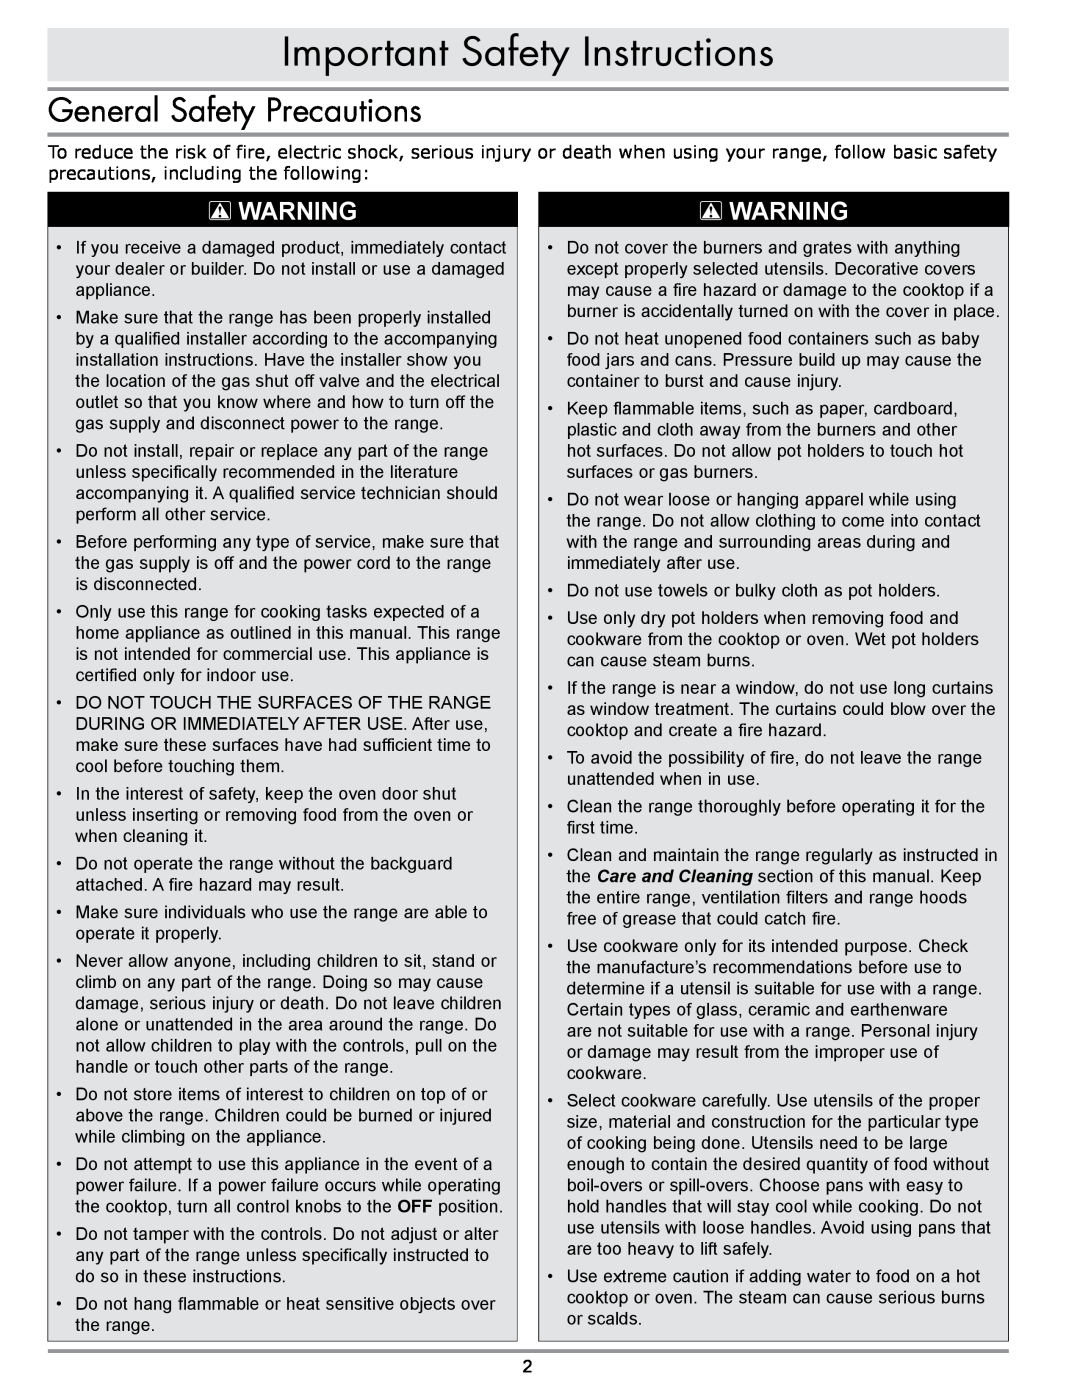 Sears ER30GI manual General Safety Precautions, Important Safety Instructions 